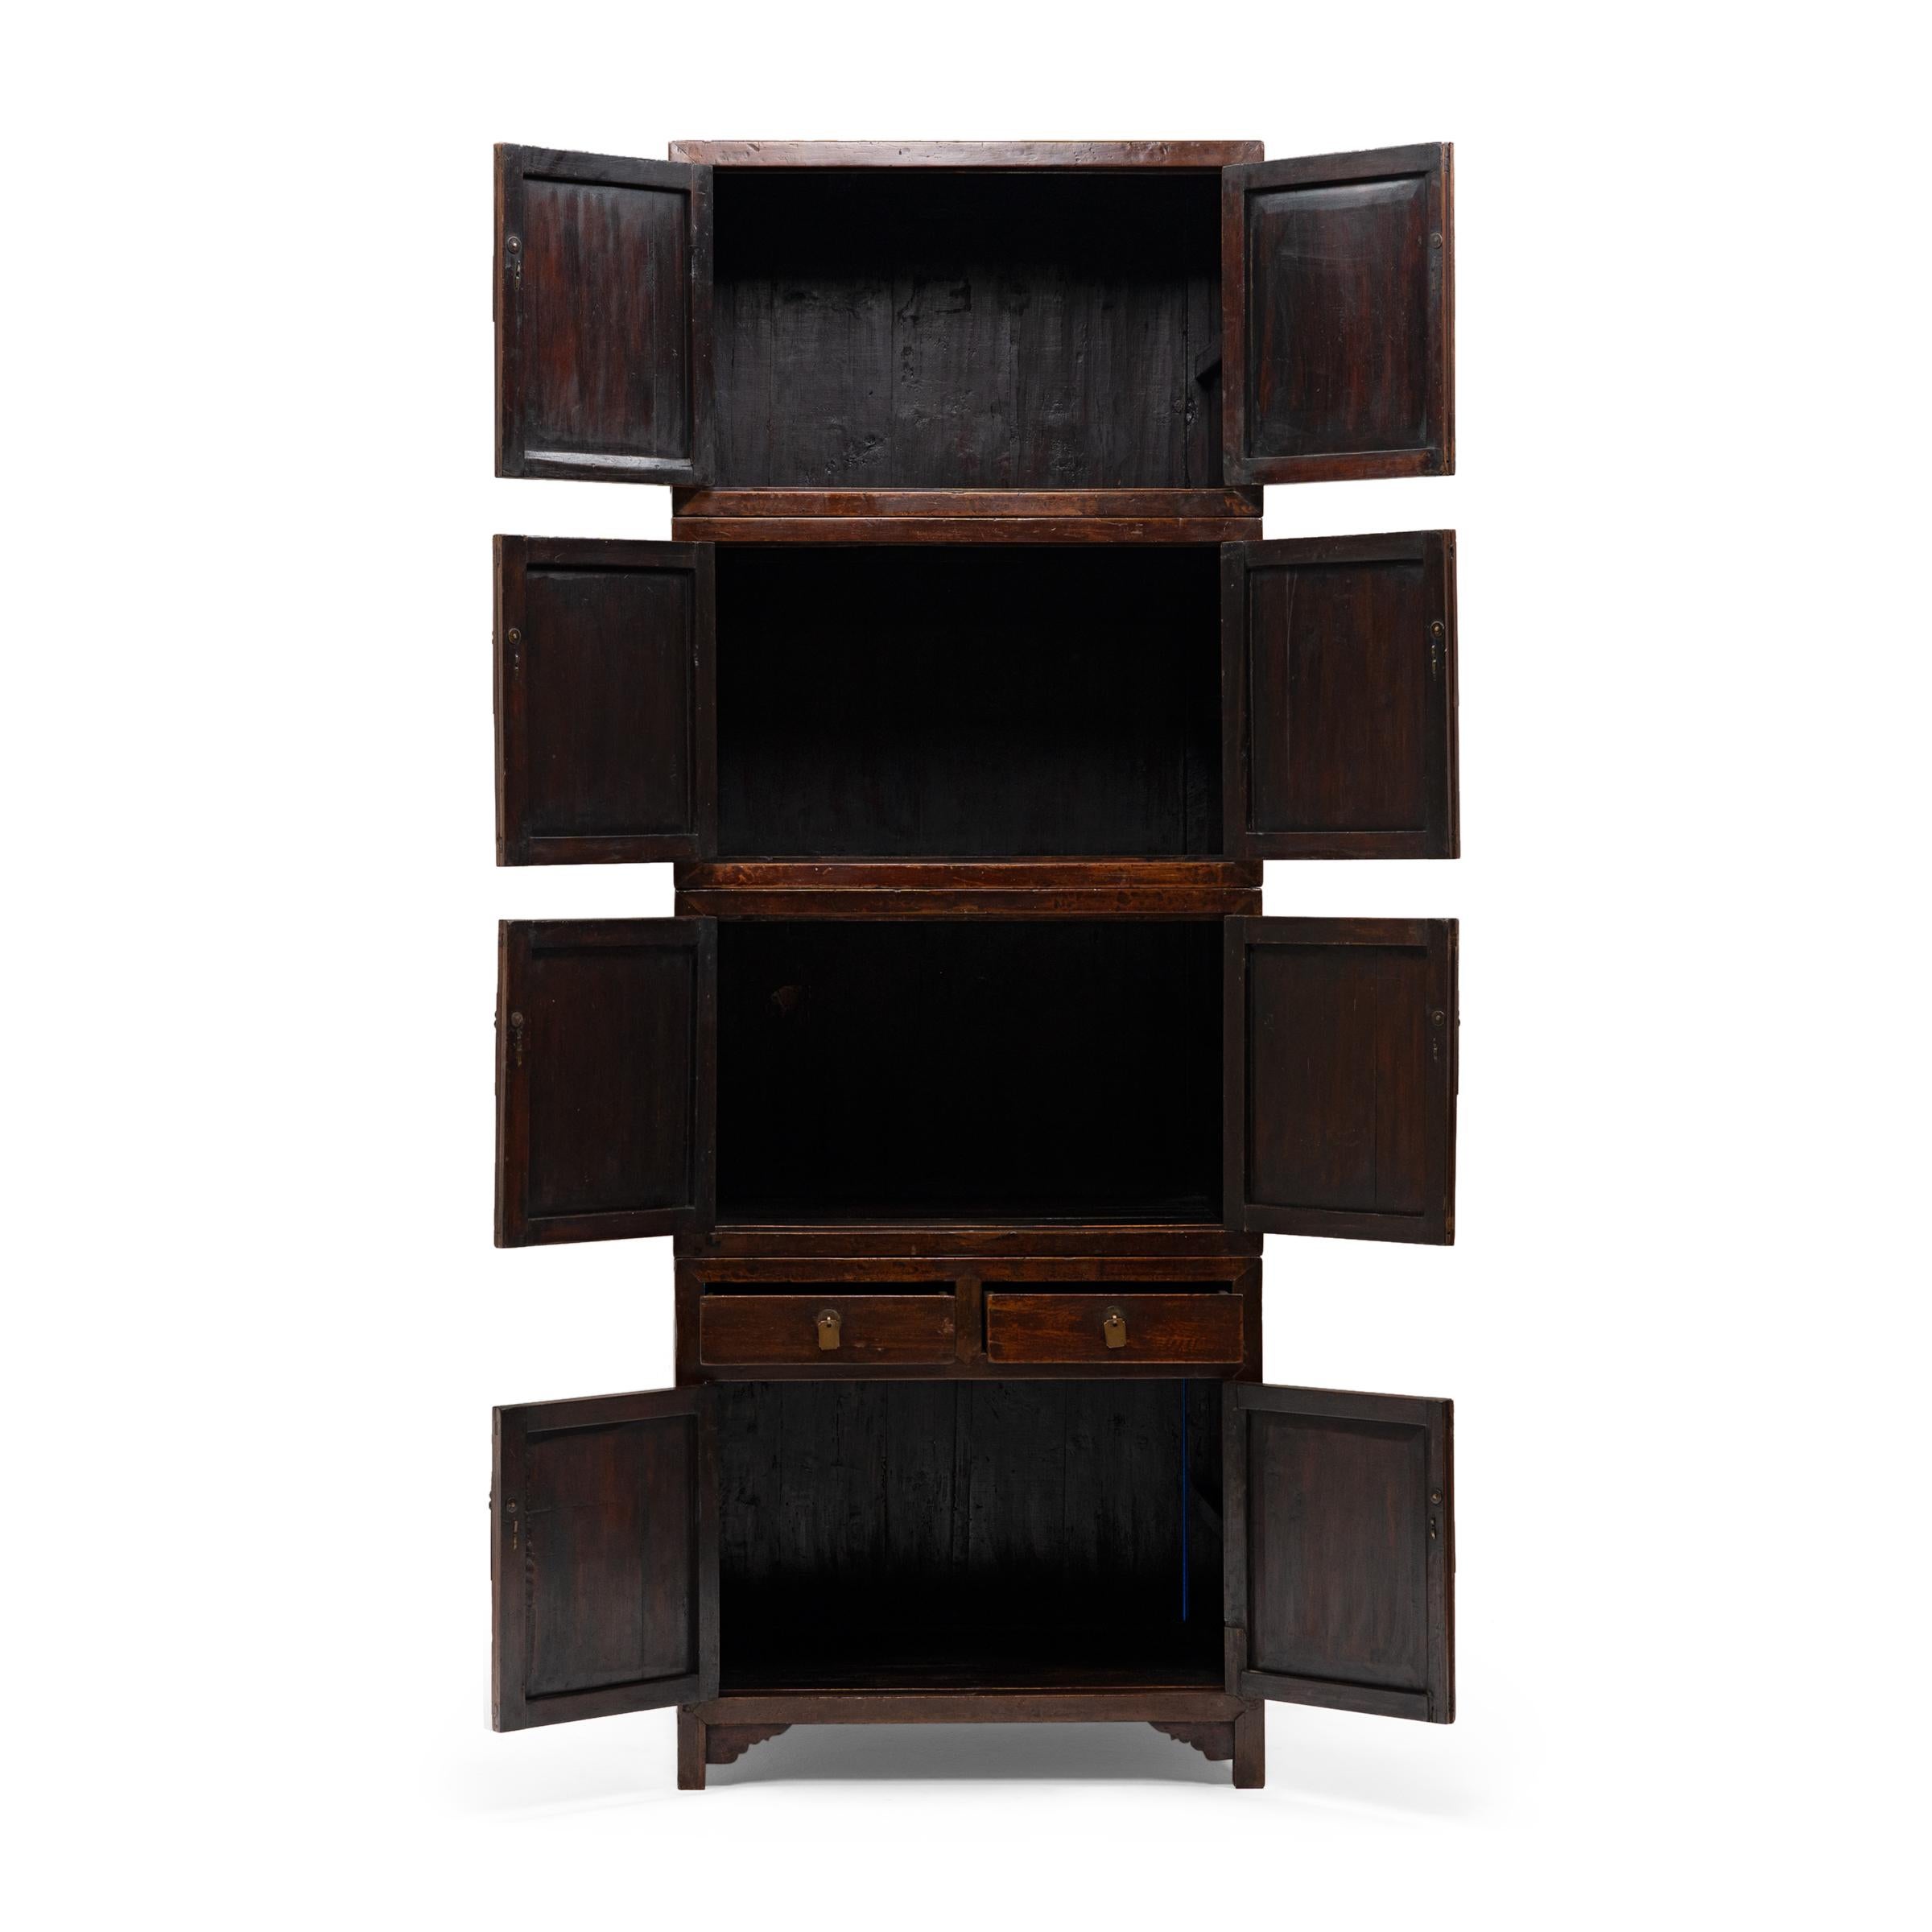 20th Century Four Piece Chinese Stacking Cabinet, c. 1930 For Sale